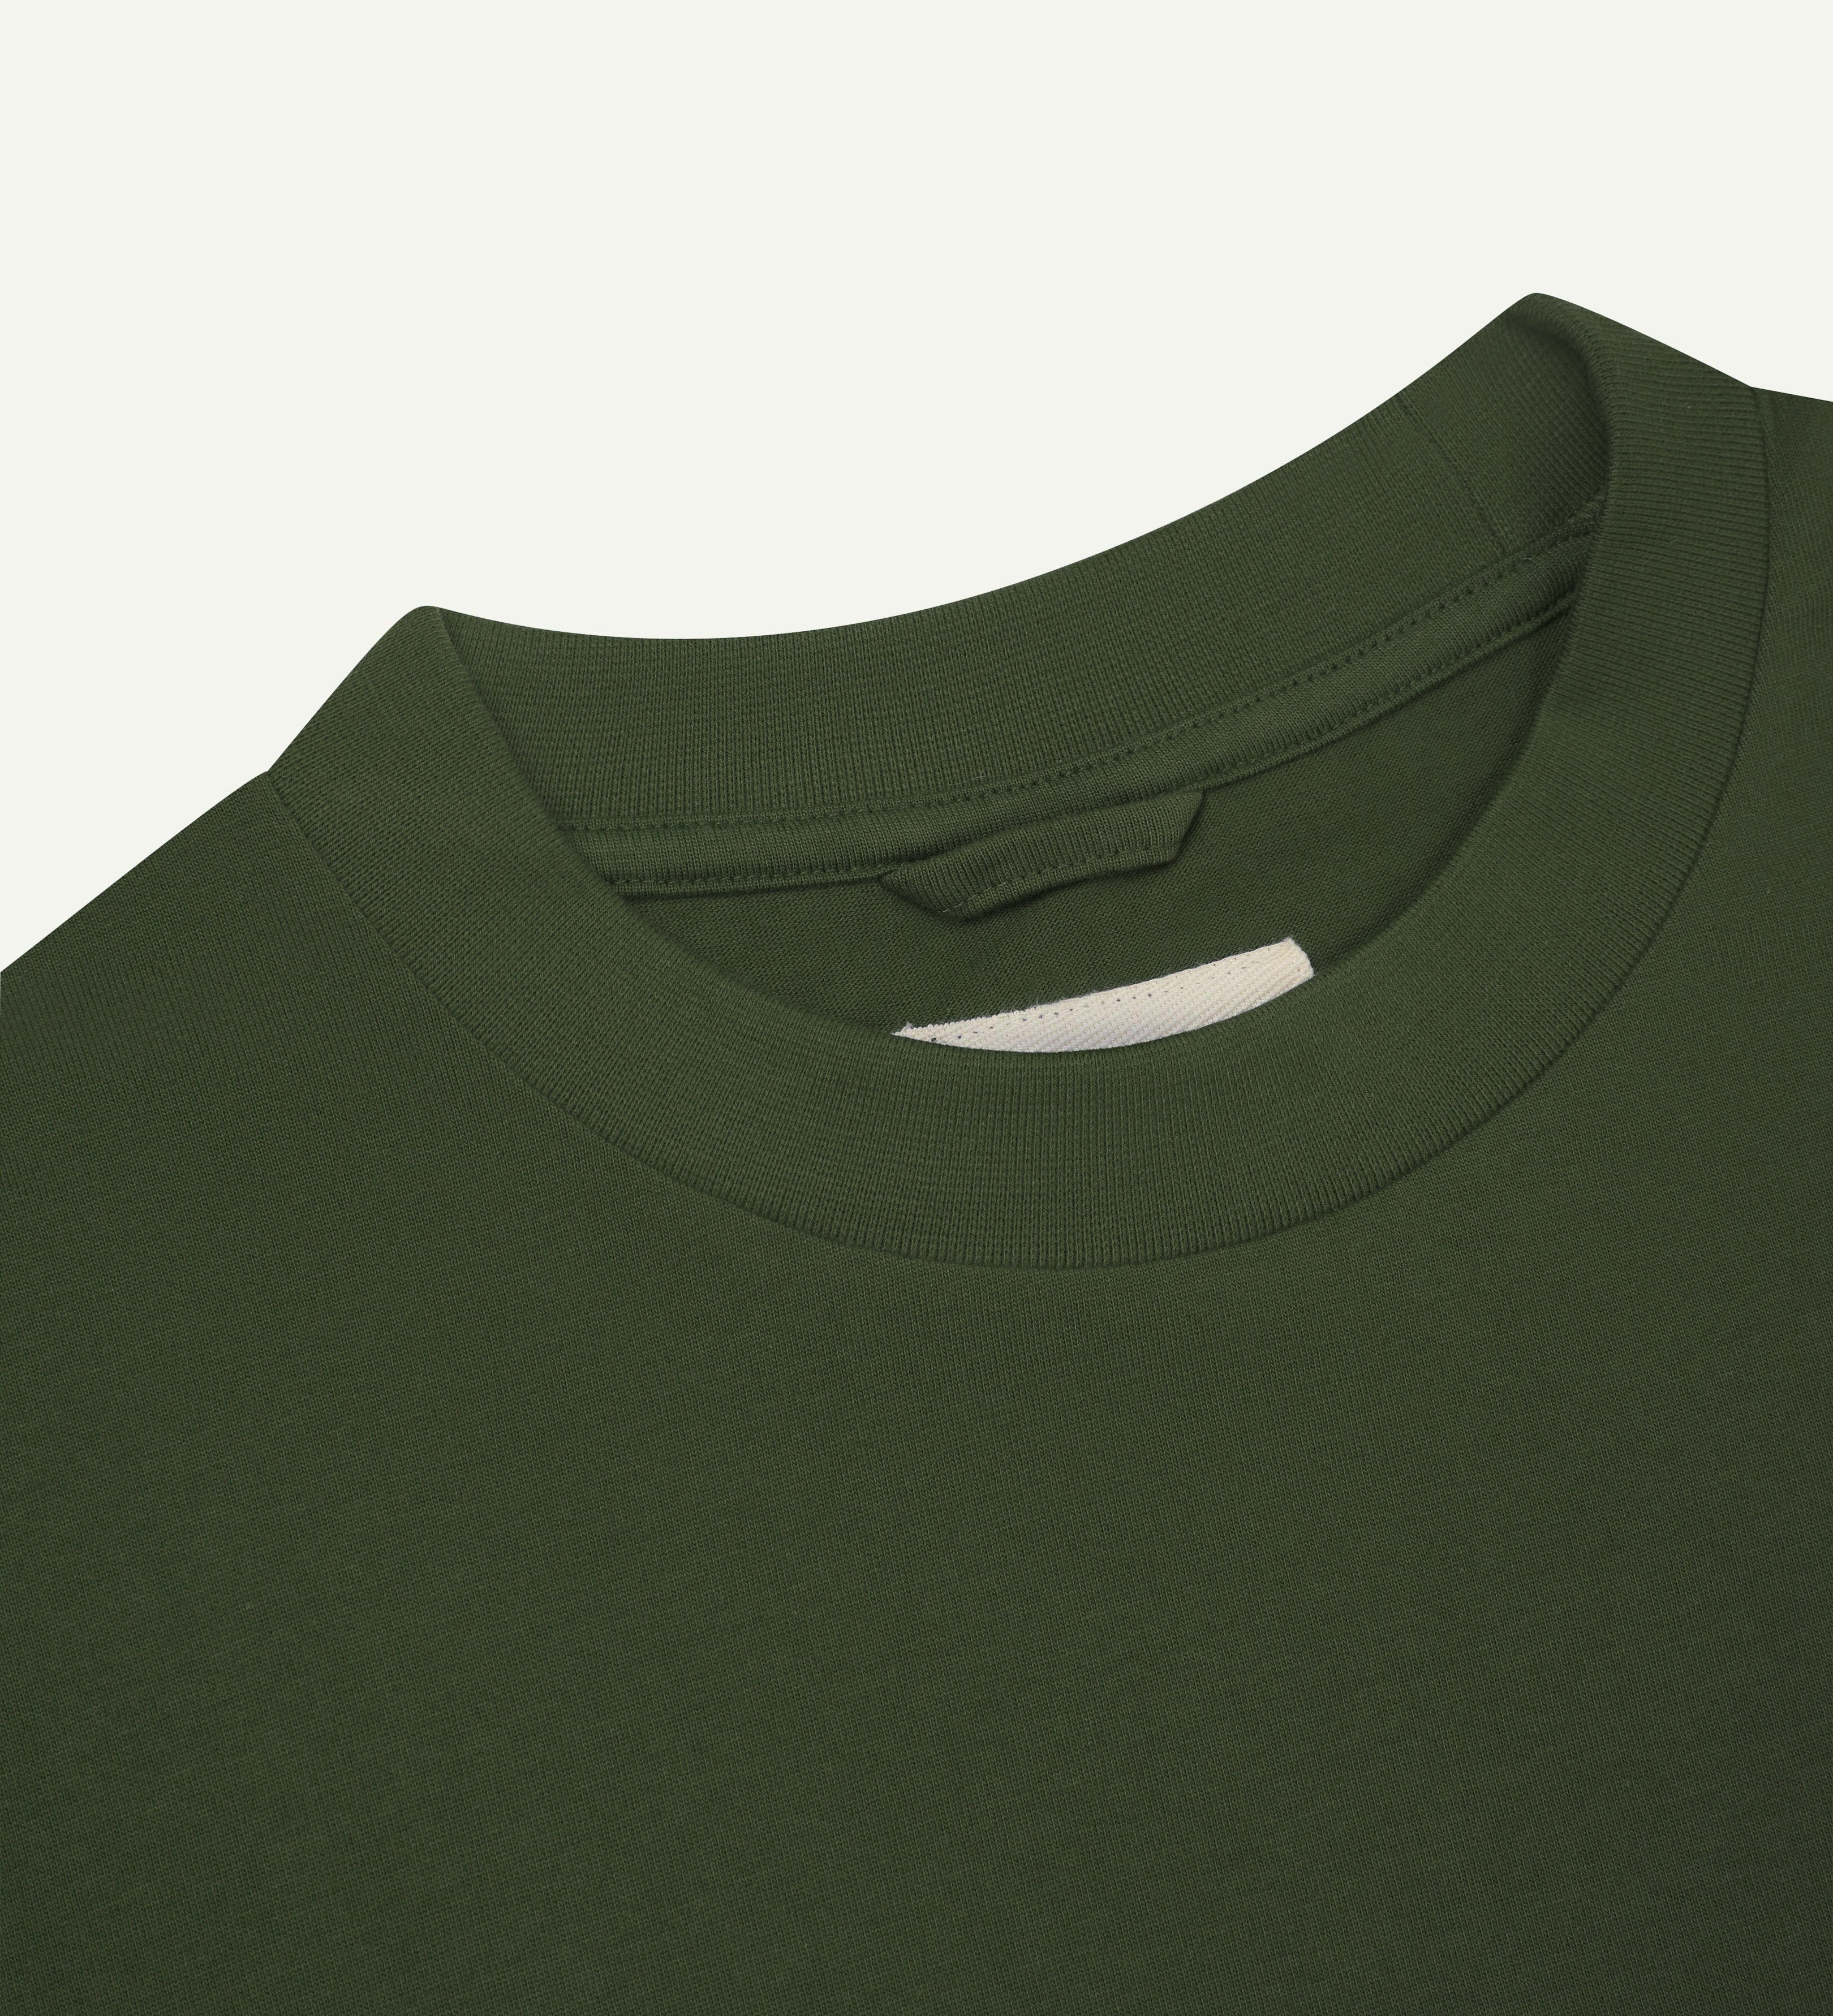 Close view of collar - mid-green oversized men's organic cotton T-shirt by Uskees.